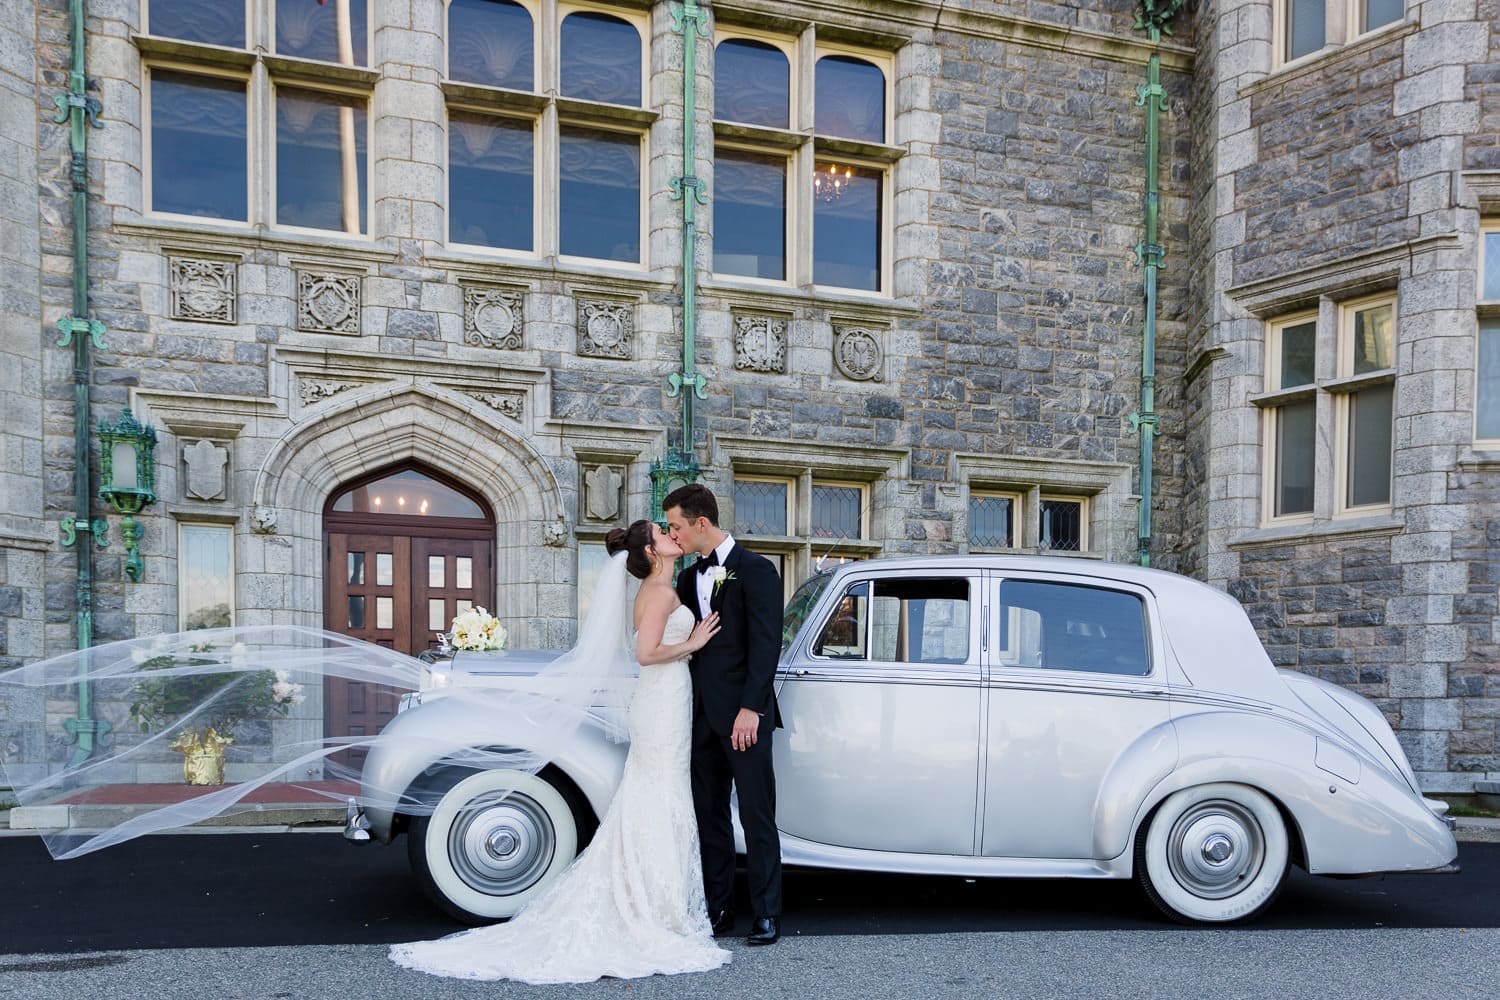 A bride and groom kiss in front of a vintage car and the branford house mansion